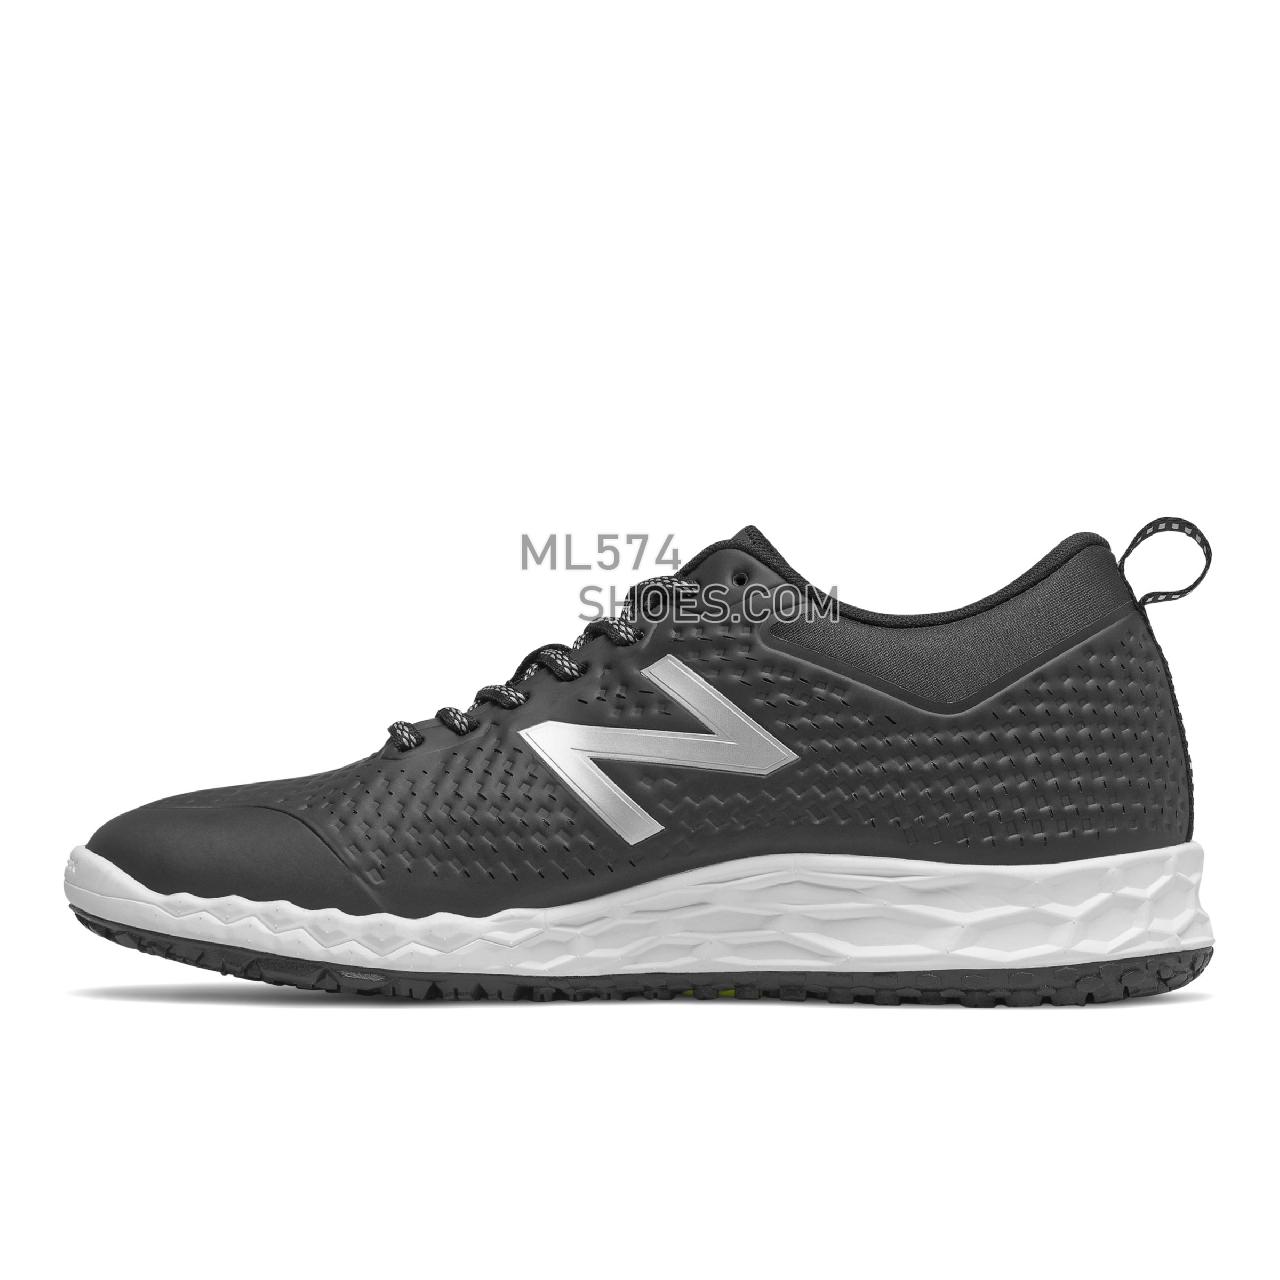 New Balance 806v1 - Men's Work - Black with Silver Metallic and White - MID806W1